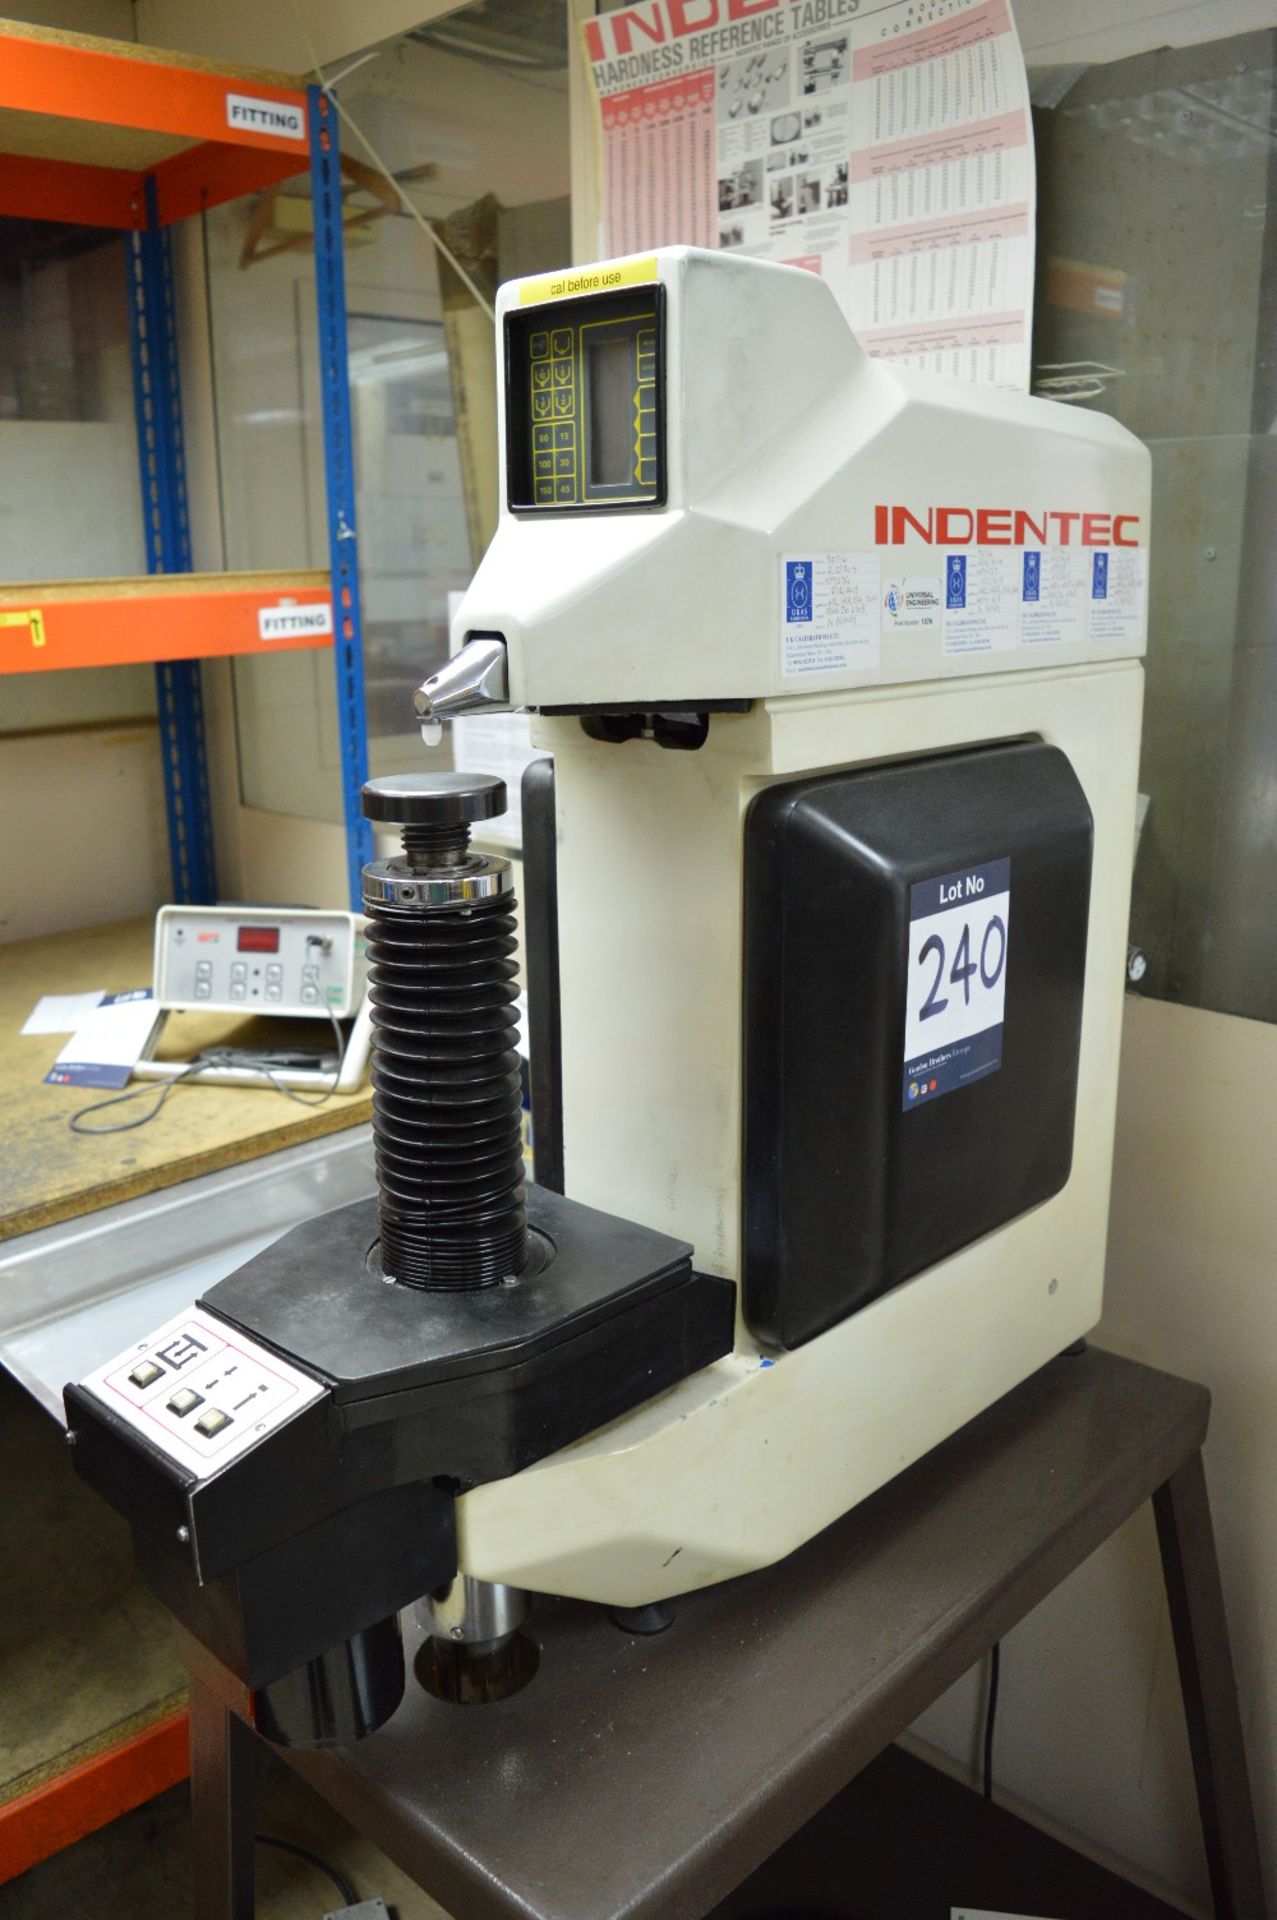 Indentec bench mounted hardness tester
Reference: